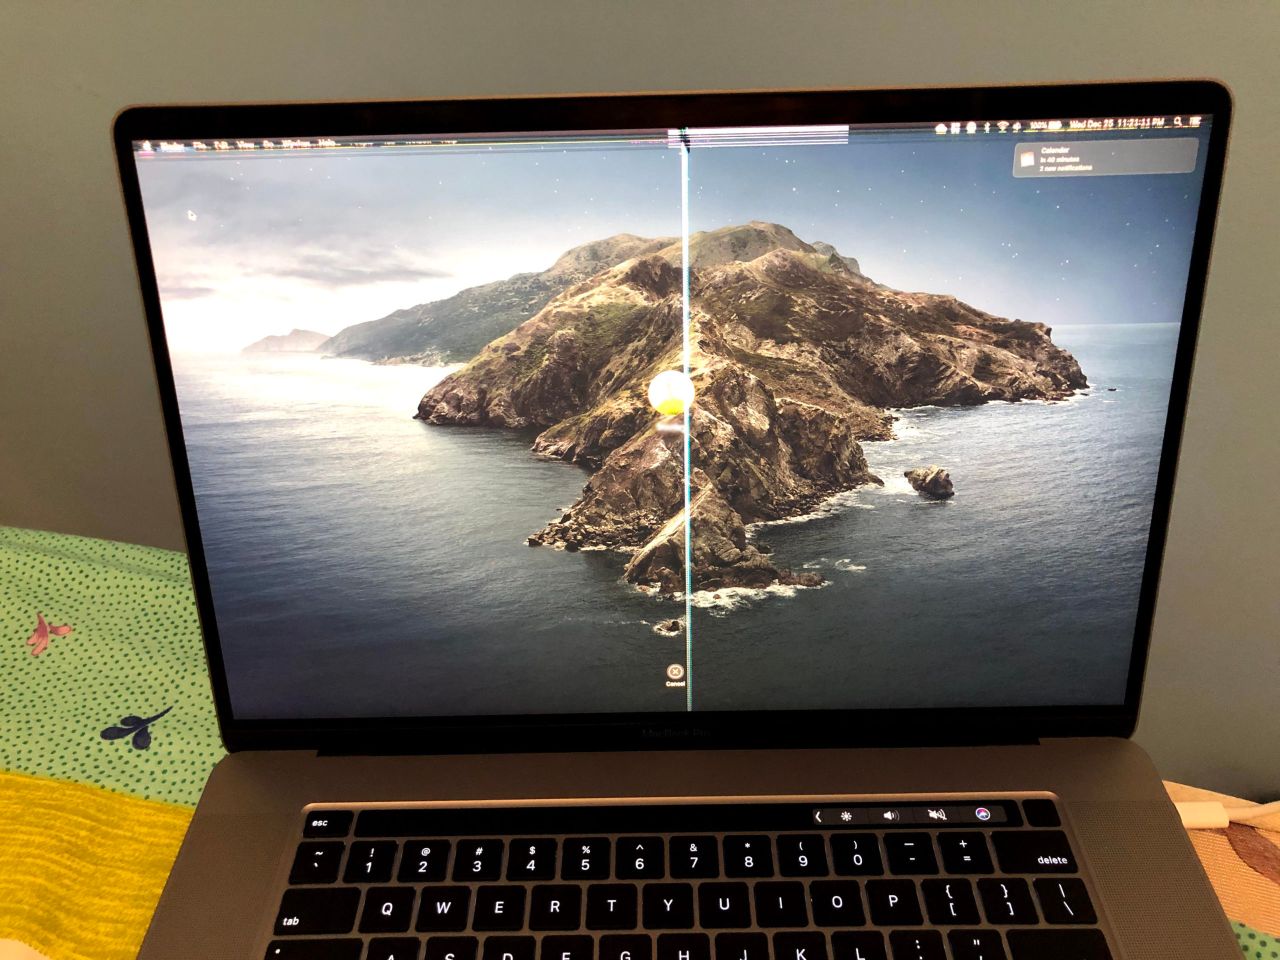 How to Block Your MacBook’s Webcam Without Using an External Cover